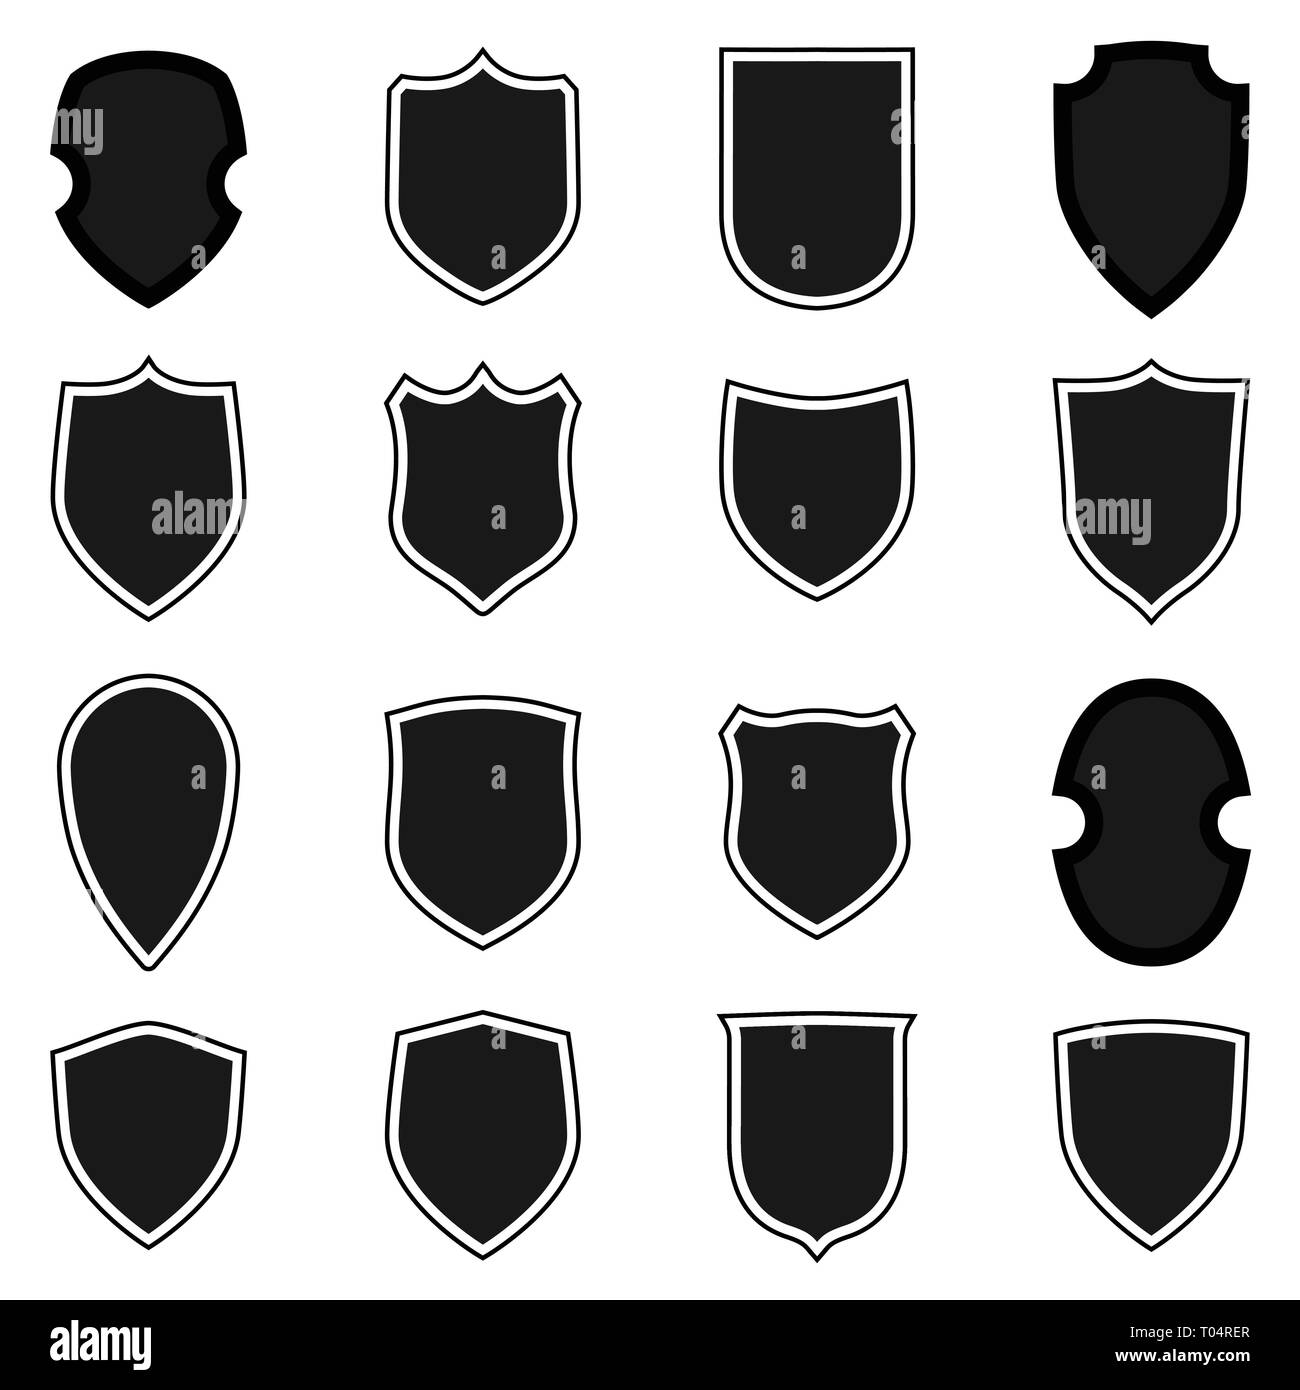 Shield shape icons set. Circuit label signs isolated on white background.  Symbol of protection, arms, security, safety. Flat retro style design.  Stock Vector